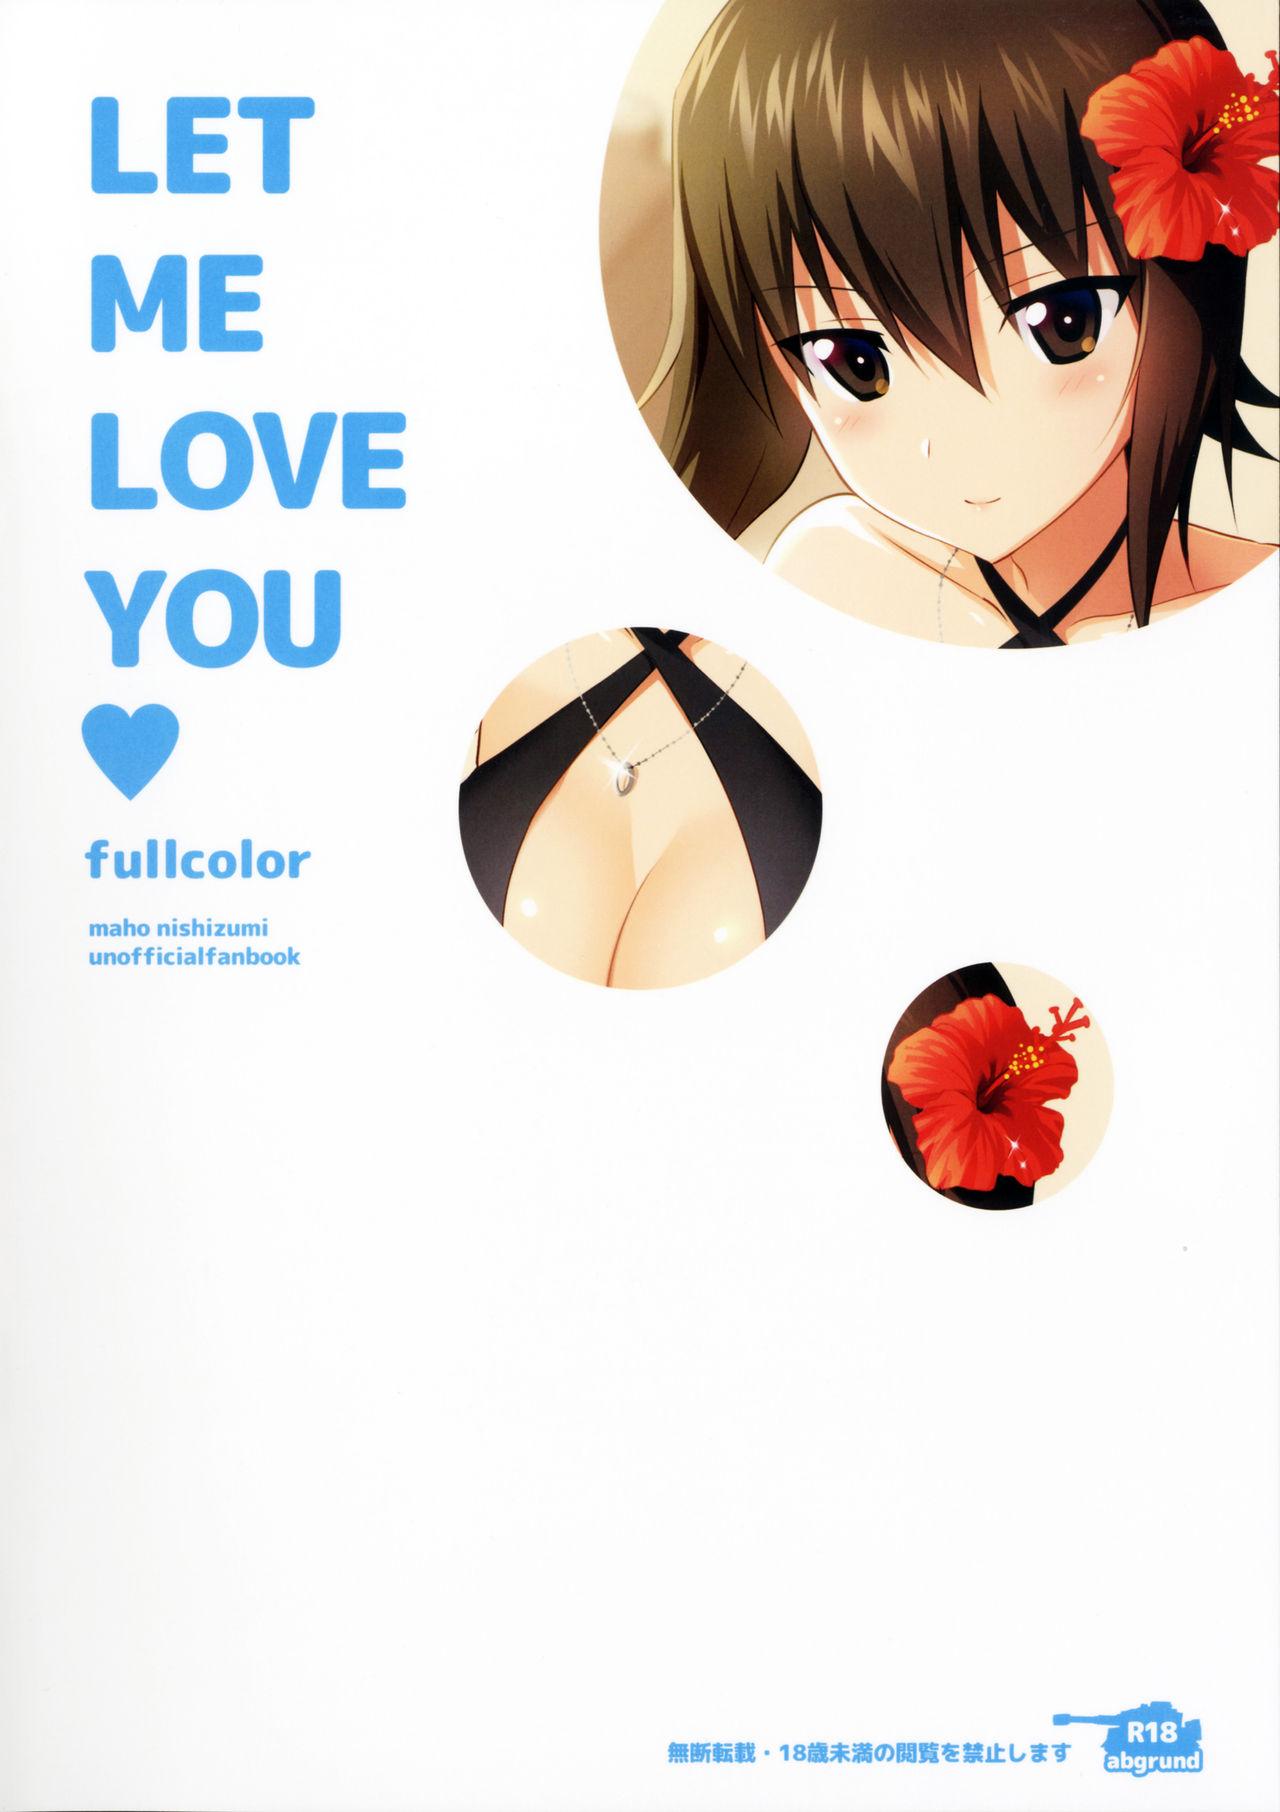 Gayemo LET ME LOVE YOU fullcolor - Girls und panzer Toys - Page 19